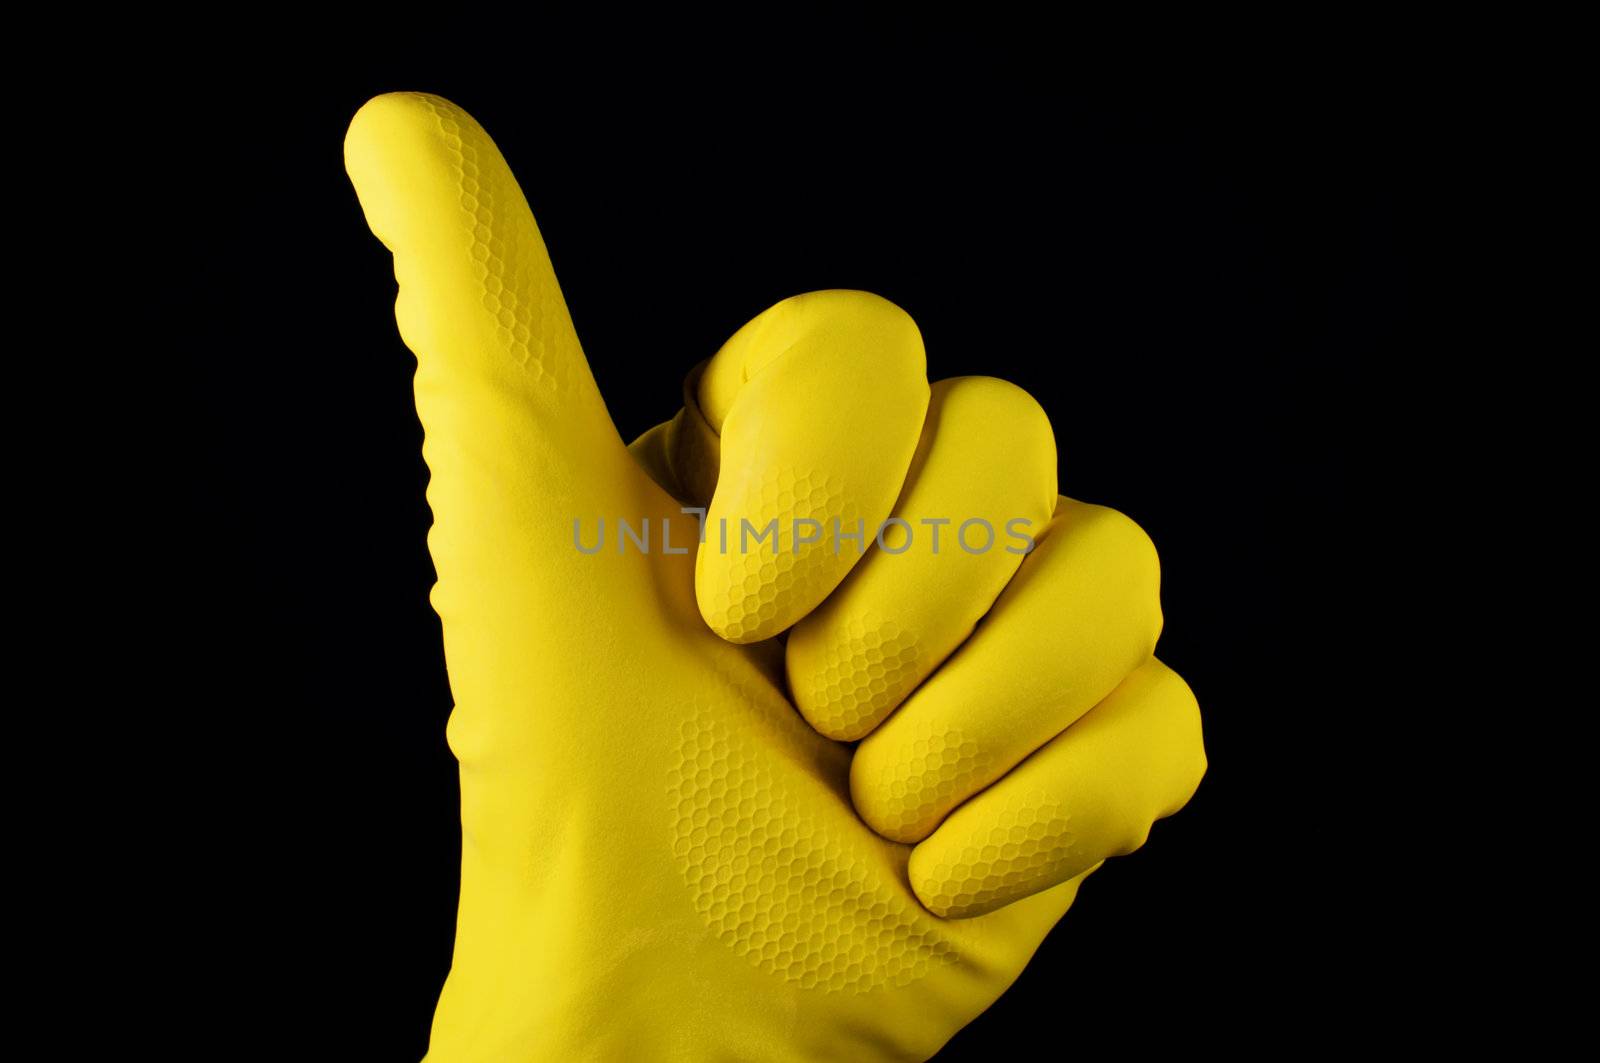 Thumb up in yellow rubber glove on black background